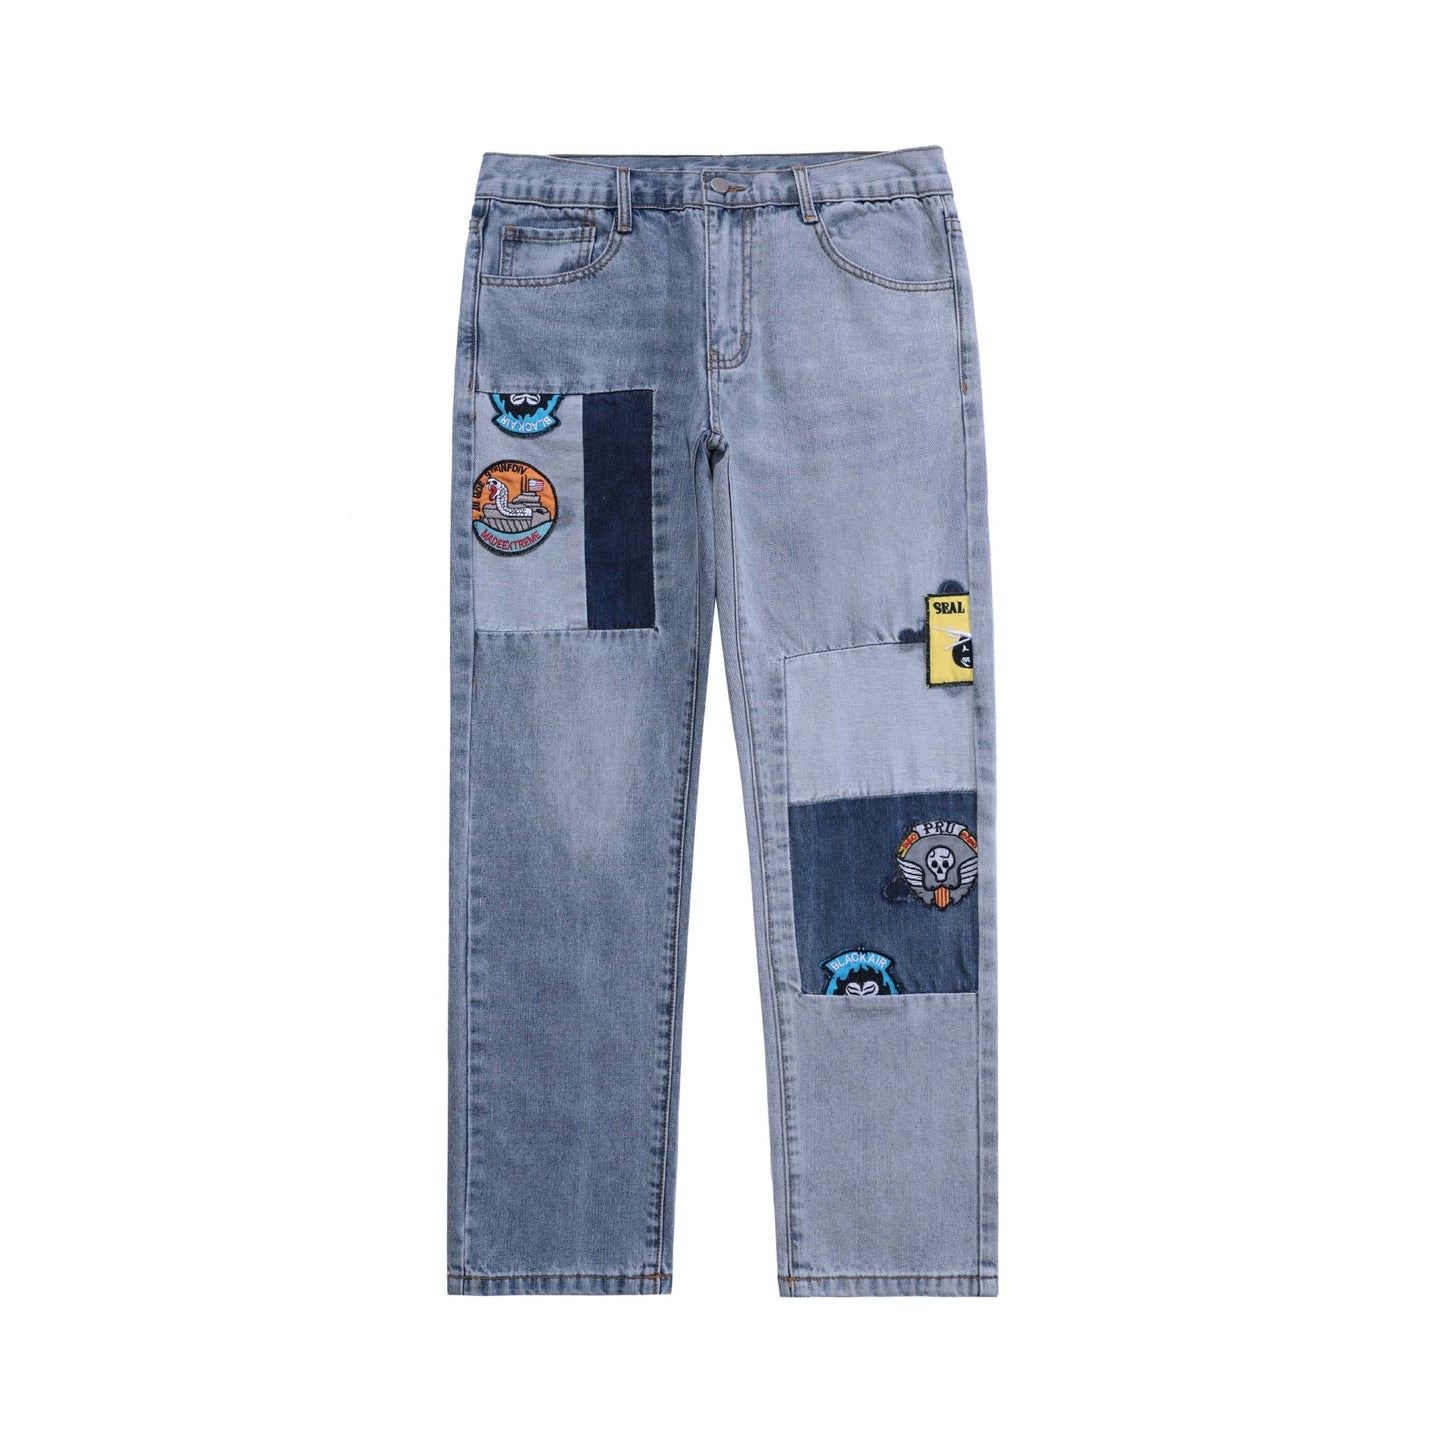 MADE ETREME Jeans